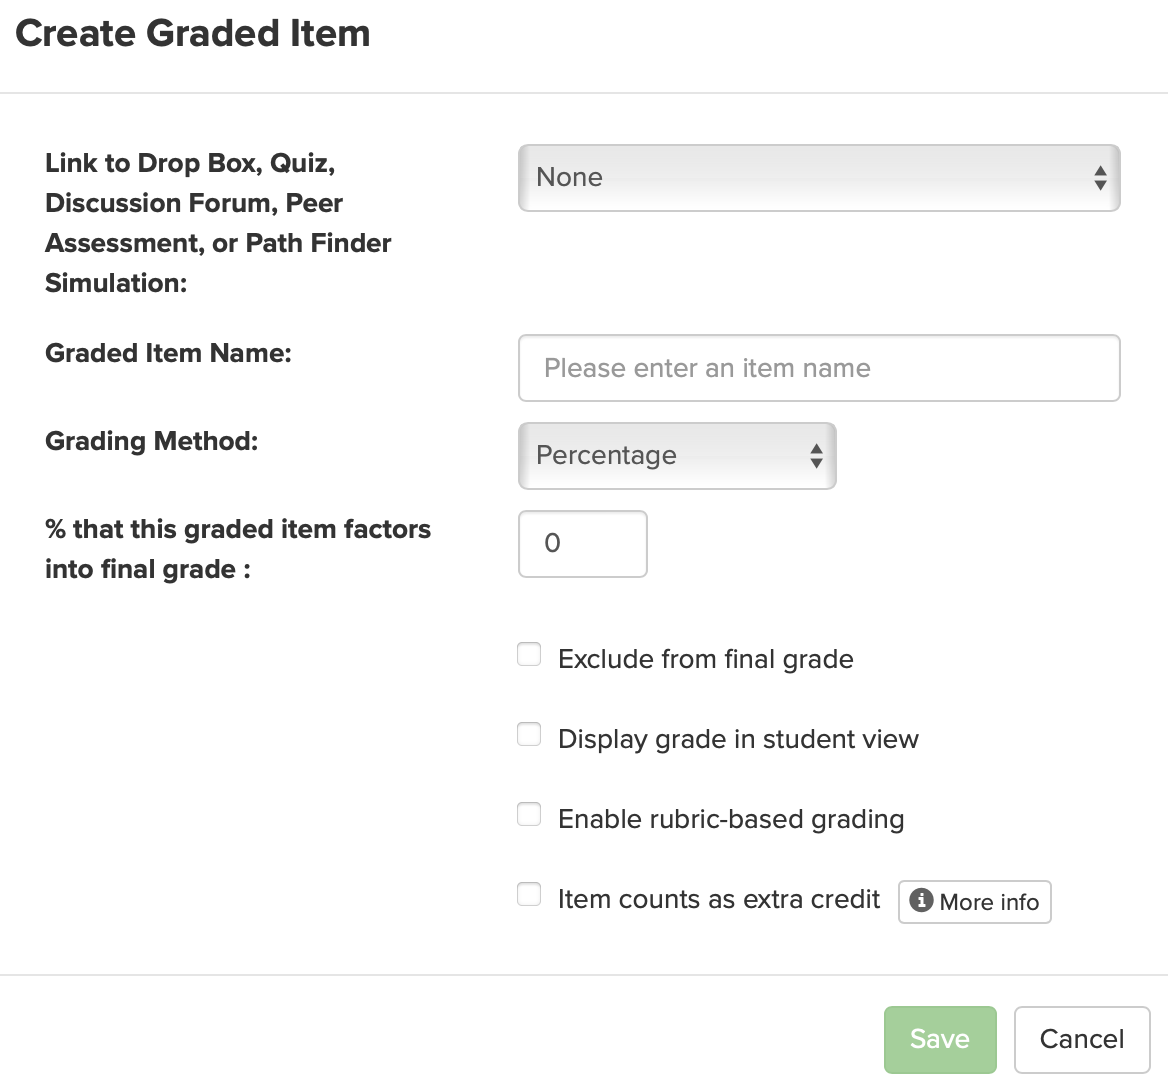 Screenshot of the window for creating a graded item